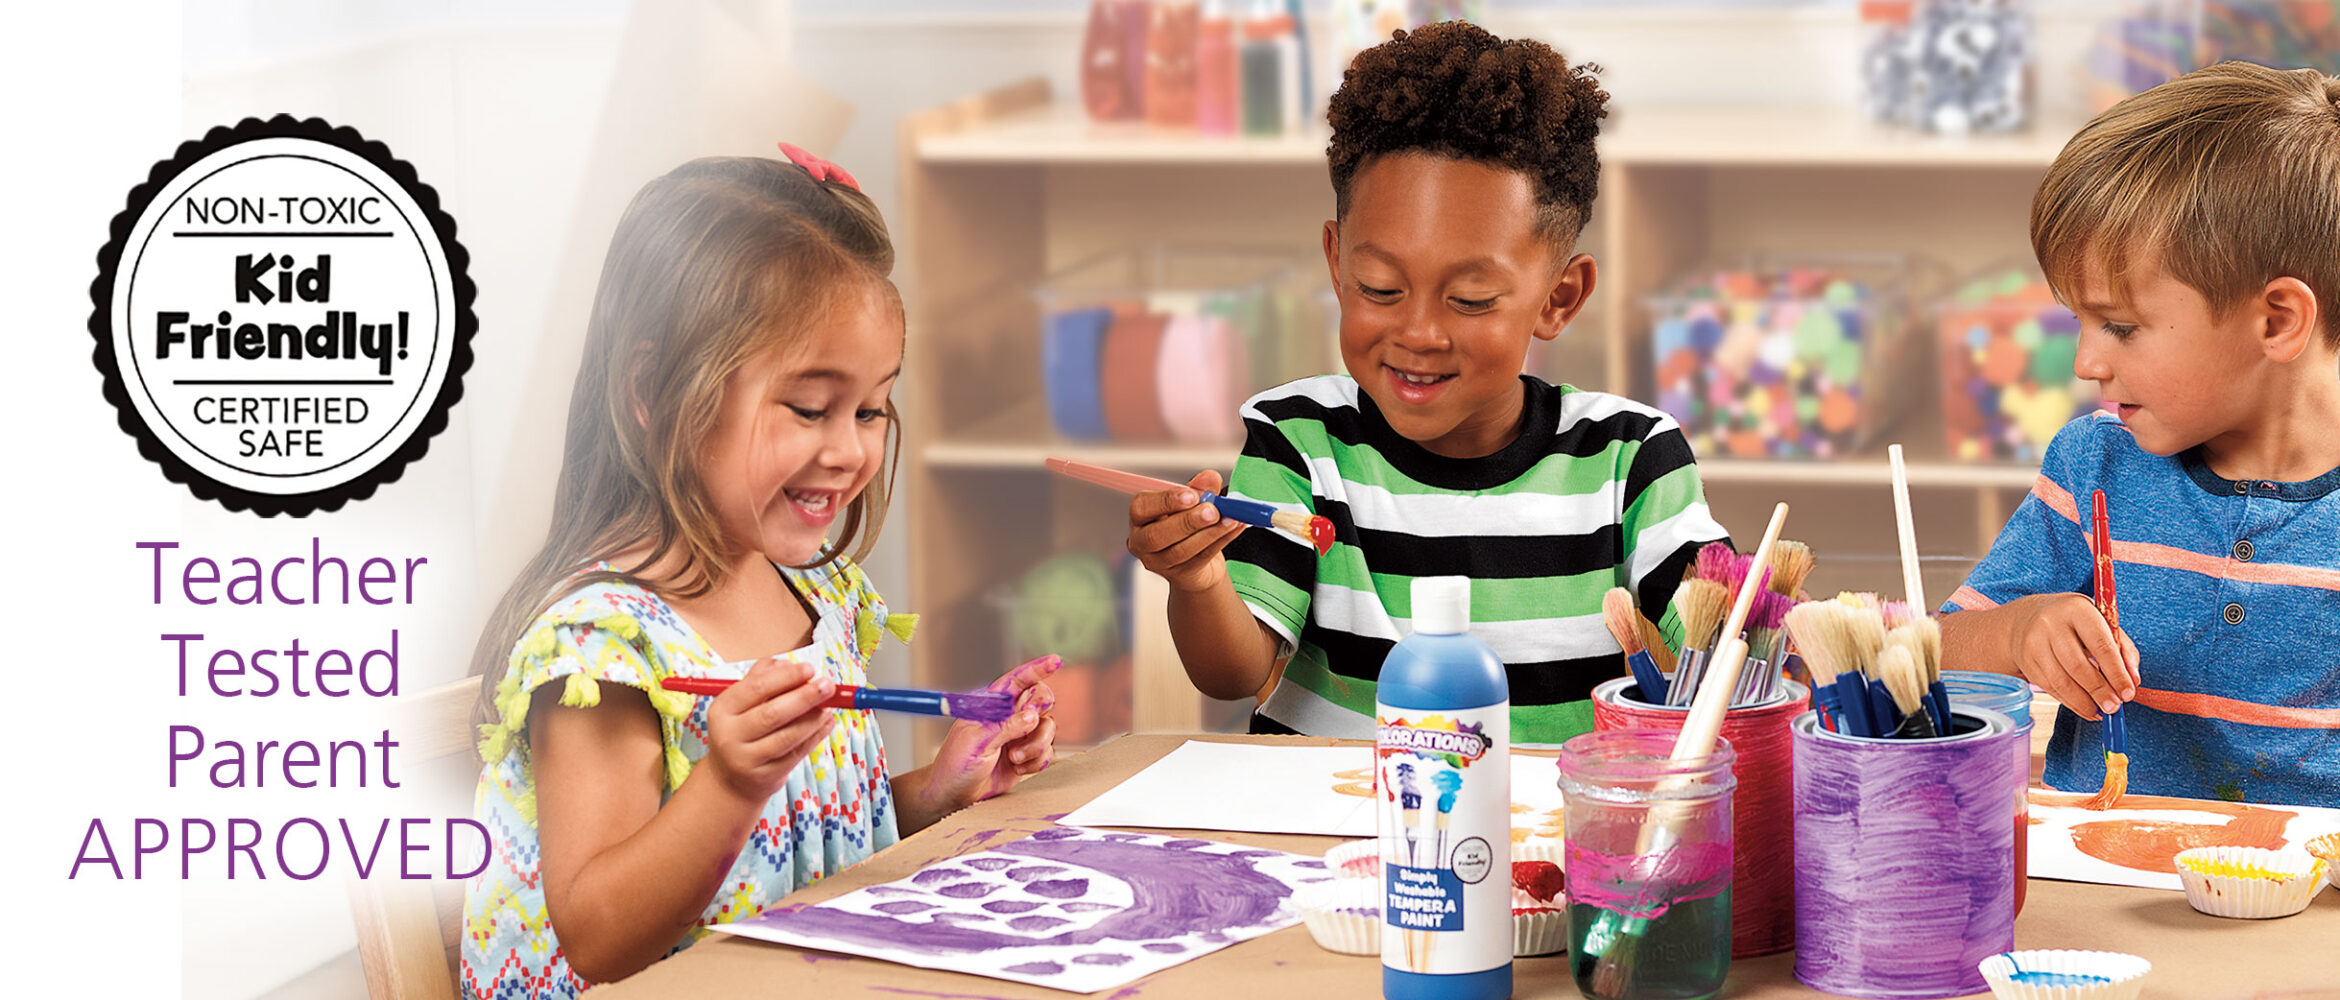 Colorations - Always Kid Friendly and Non-Toxic, Teacher Tested, Parent APPROVED